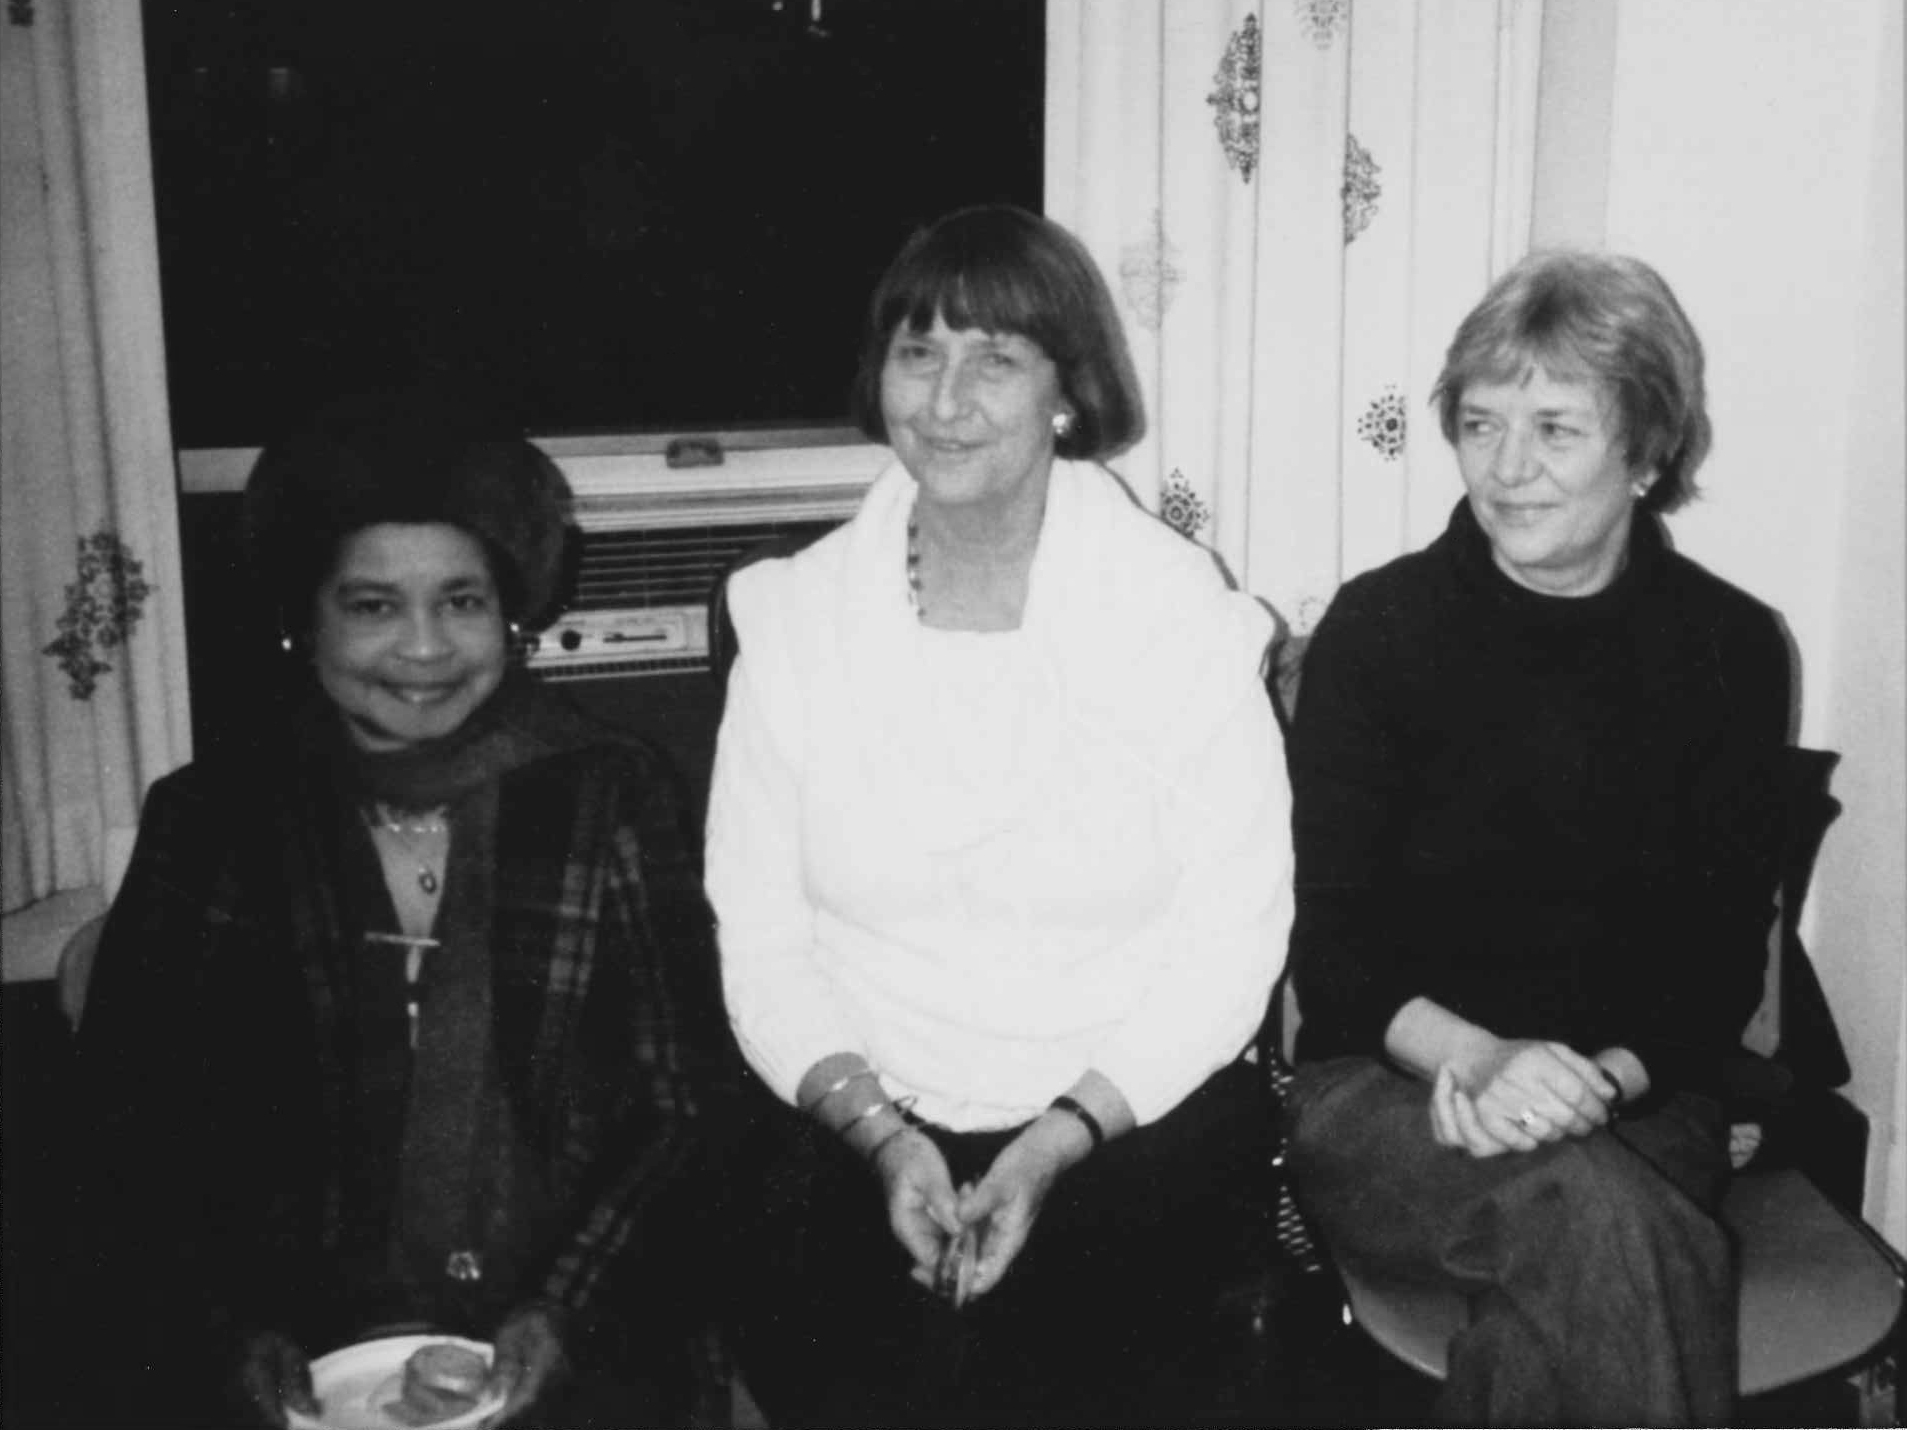 LAS Founding Mothers (L to R): Willie James, Jane Welch, Doka Clausen